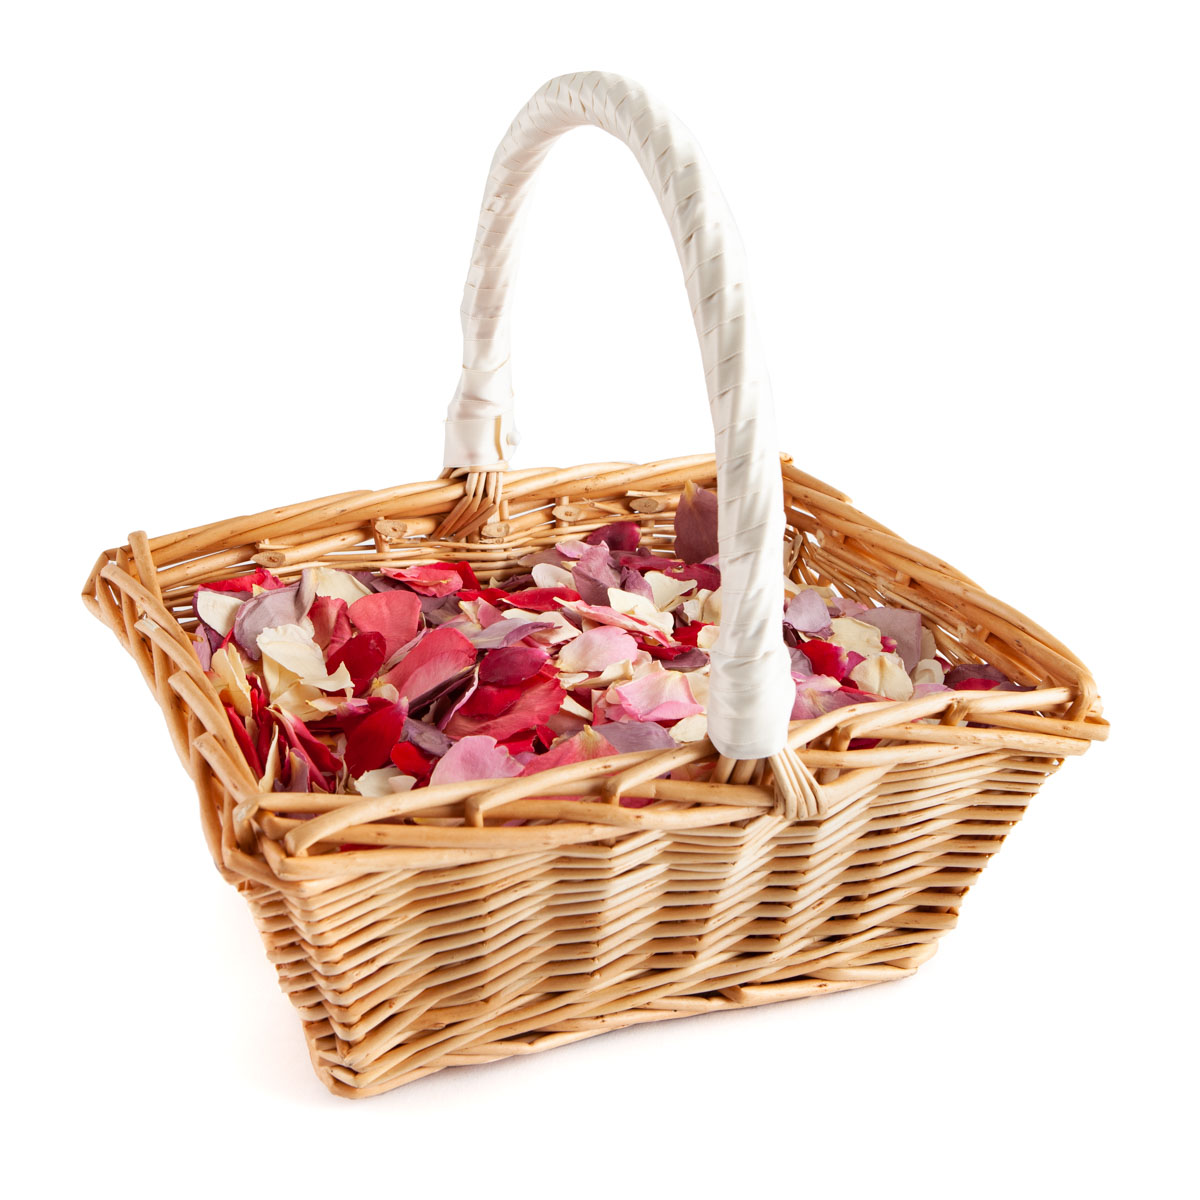 A Rectangular Confetti Basket filled with Rose Petals